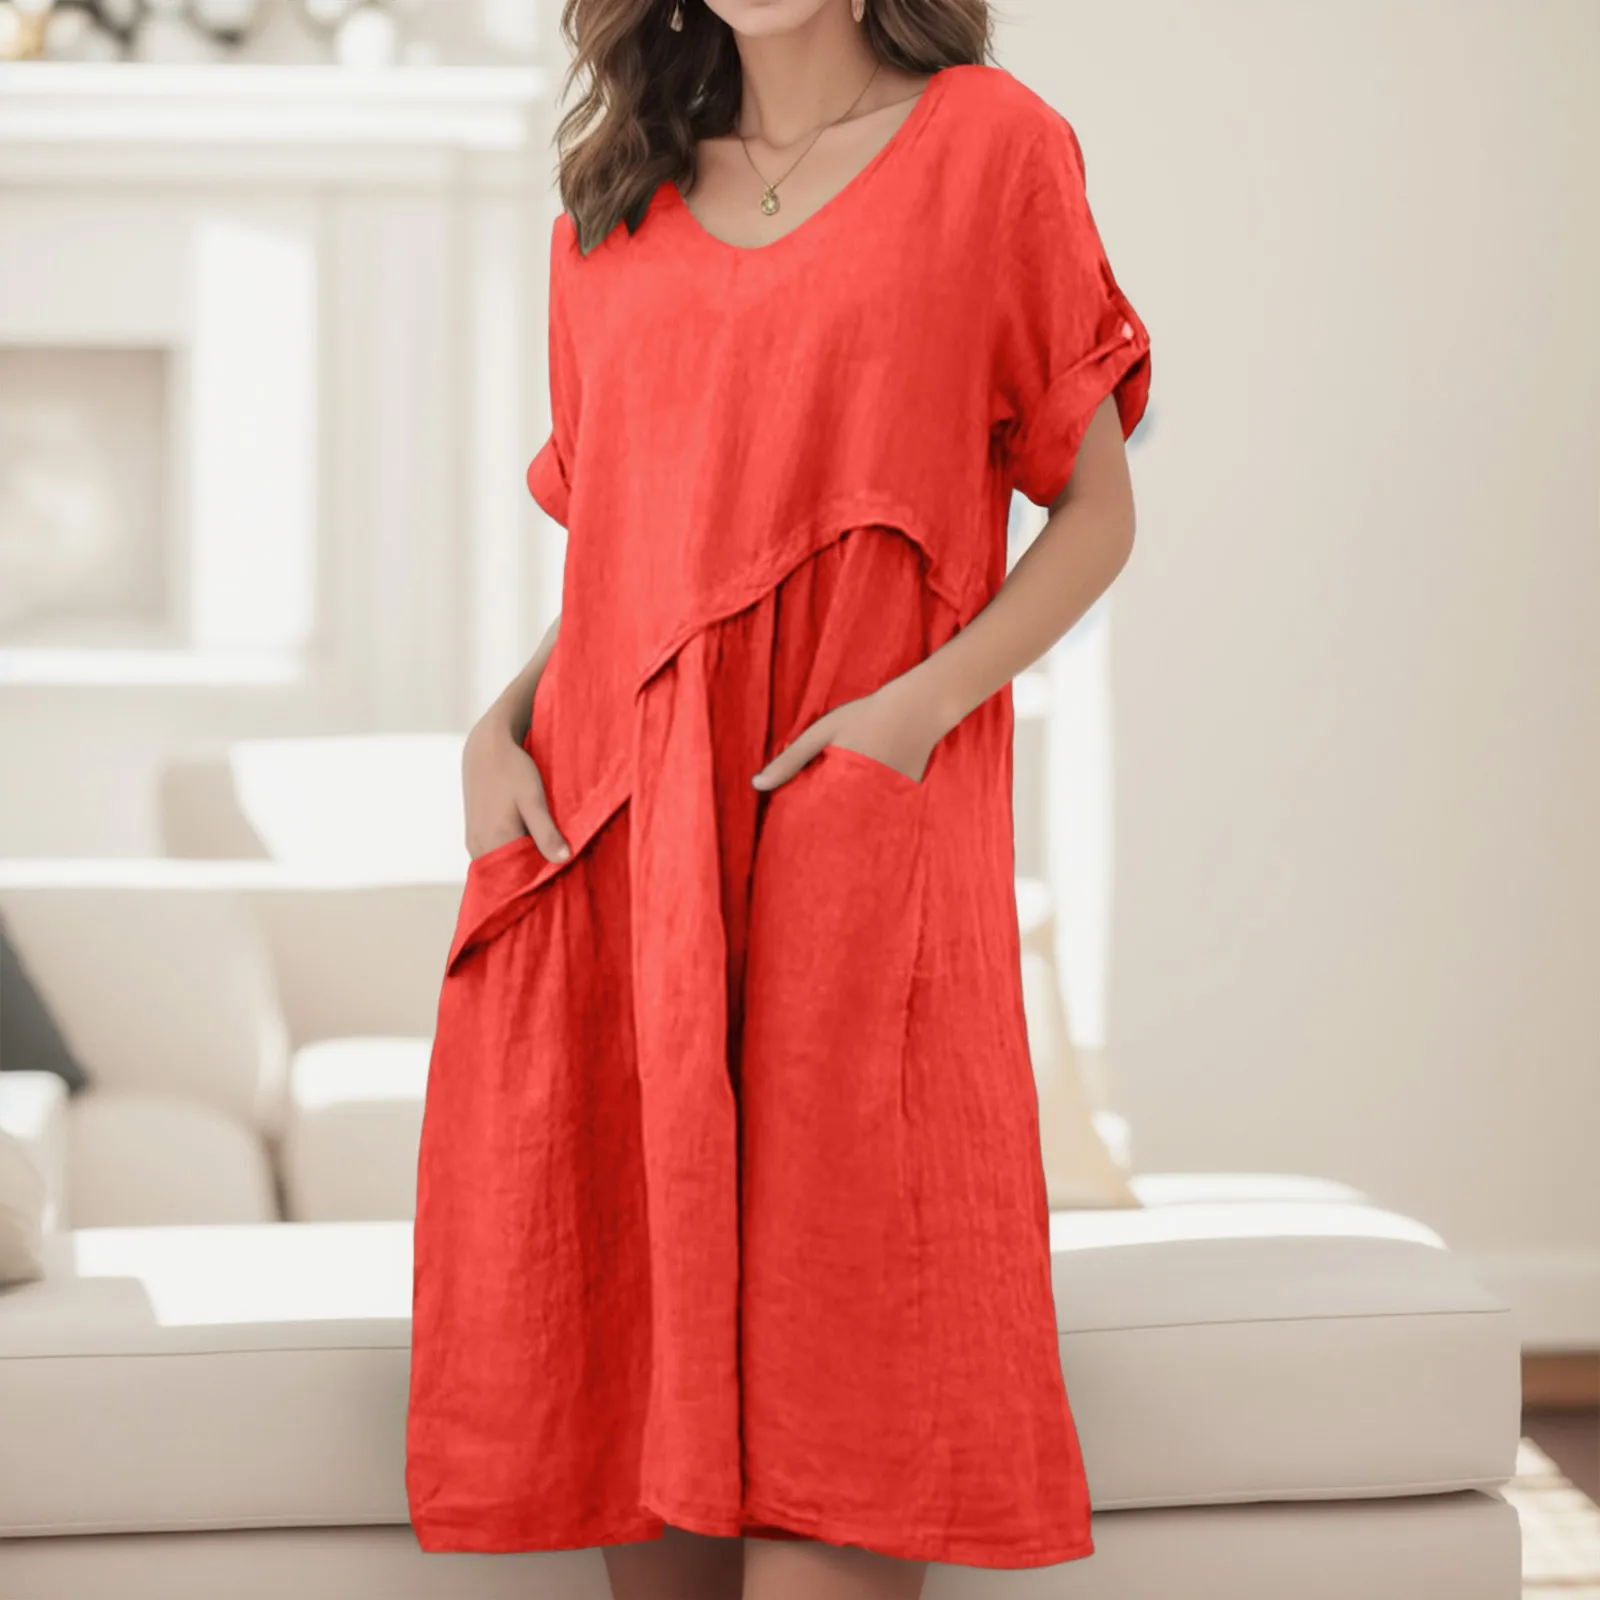 Summer Dresses for Women National Style Retro Women's Cotton and Linen O-neck Large Swing Loose Dress with Pocket Vestidos